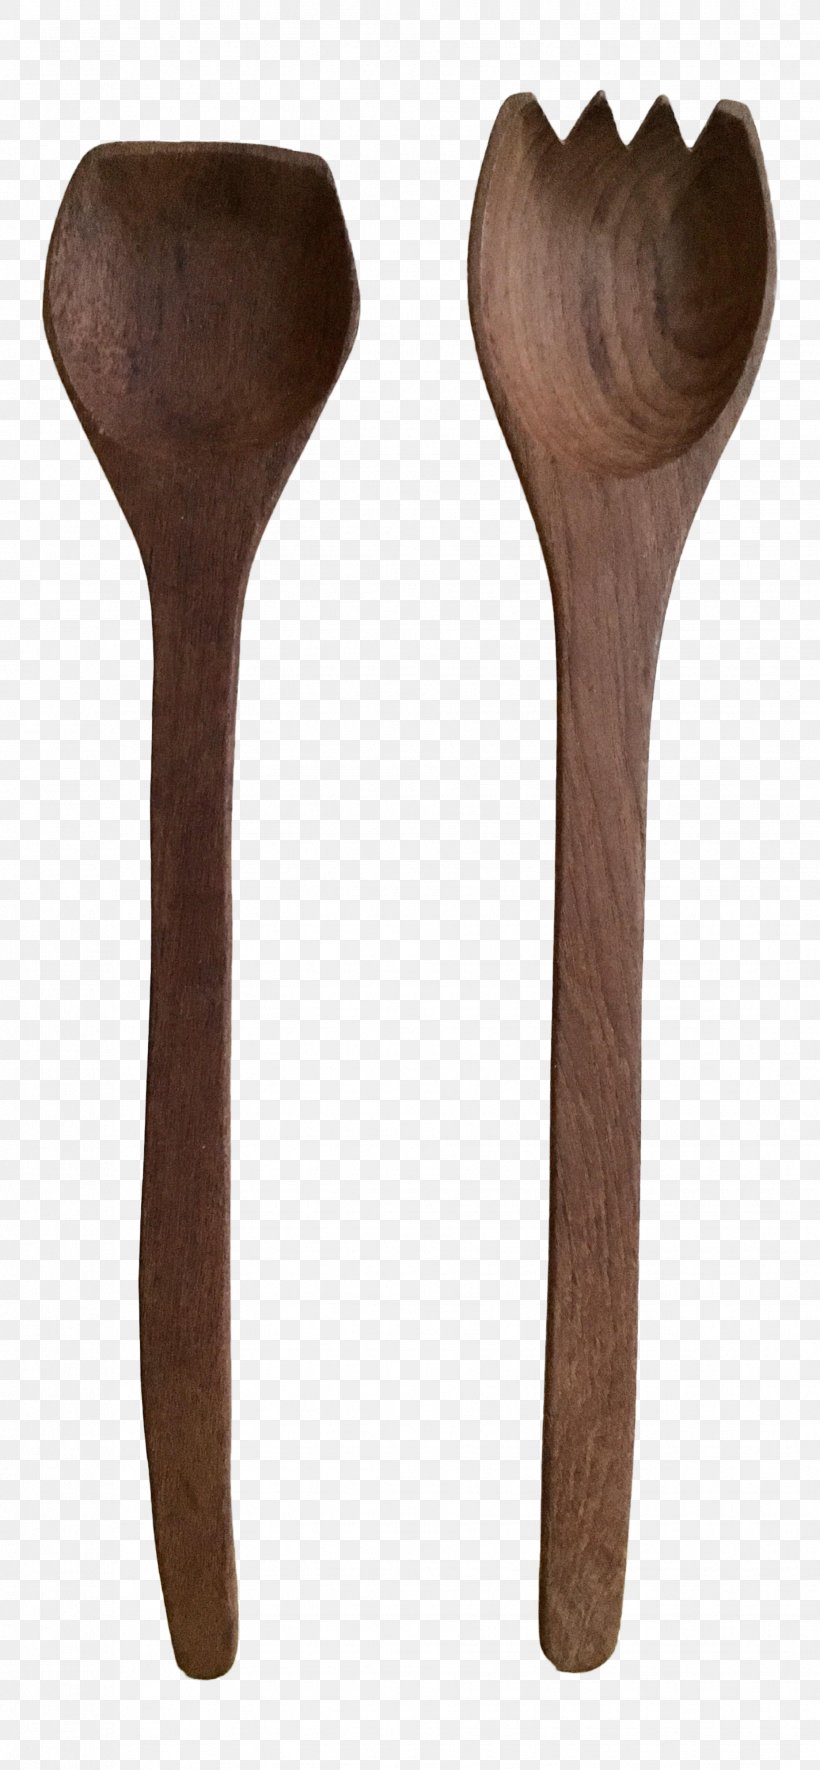 Wooden Spoon Product Design, PNG, 1856x4007px, Wooden Spoon, Cutlery, Spoon, Tableware, Wood Download Free